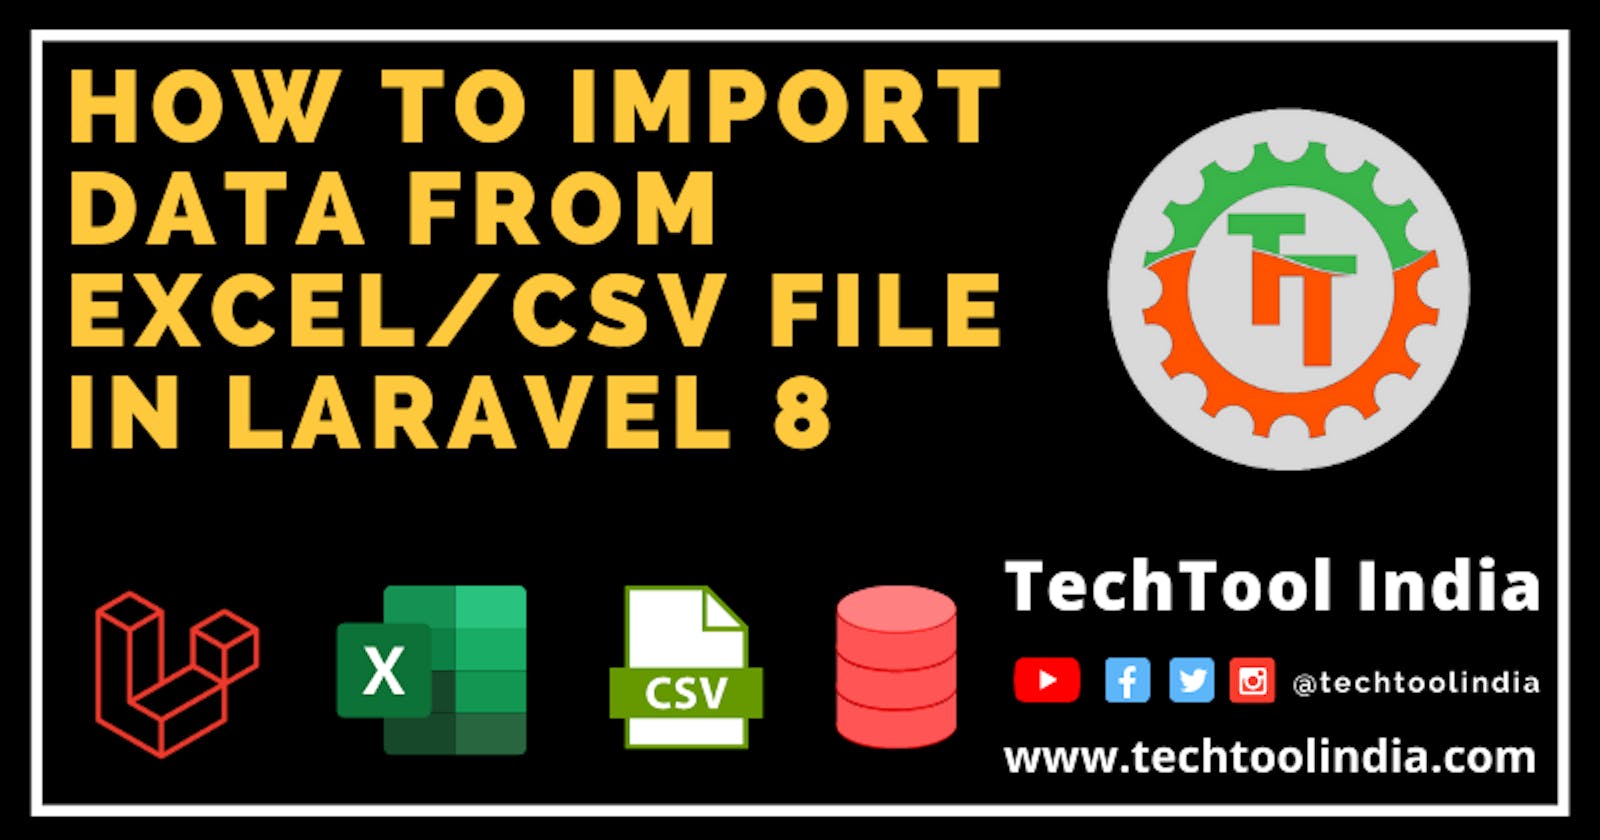 How to import excel CSV files into Laravel 8